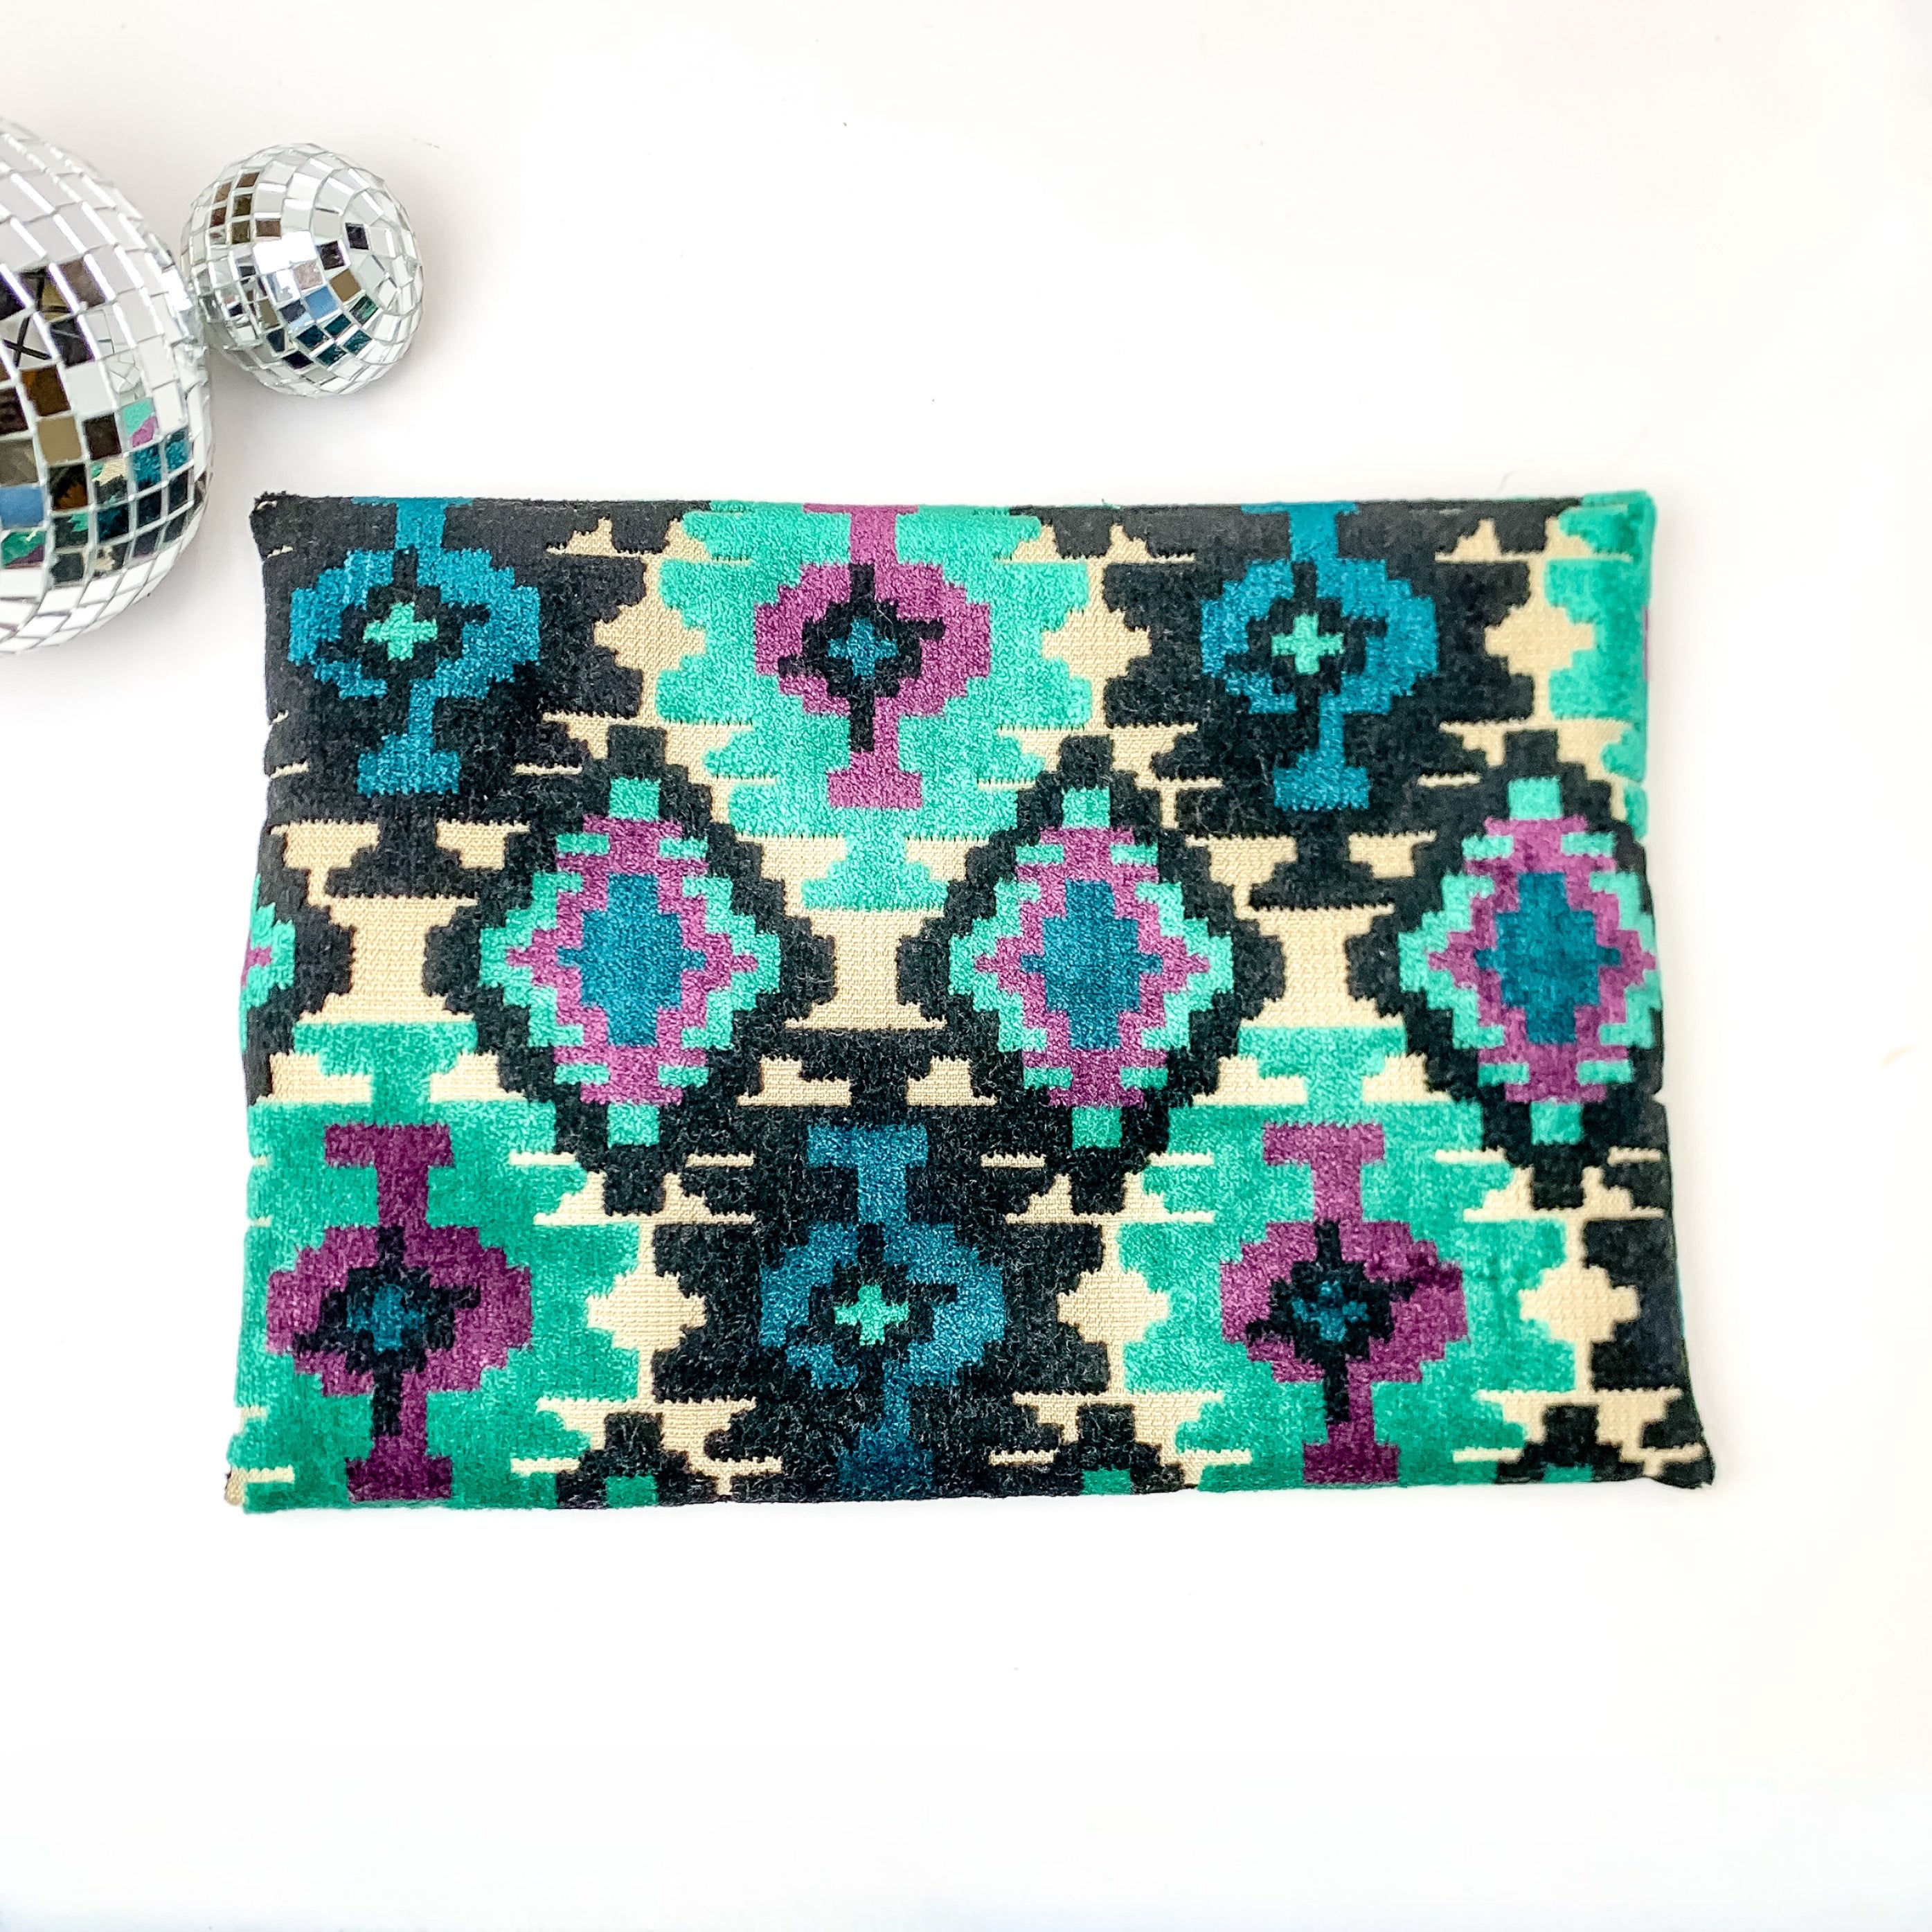 Makeup Junkie | Medium Midnight Aztec Lay Flat Bag in Turquoise Green and Black Mix - Giddy Up Glamour Boutique